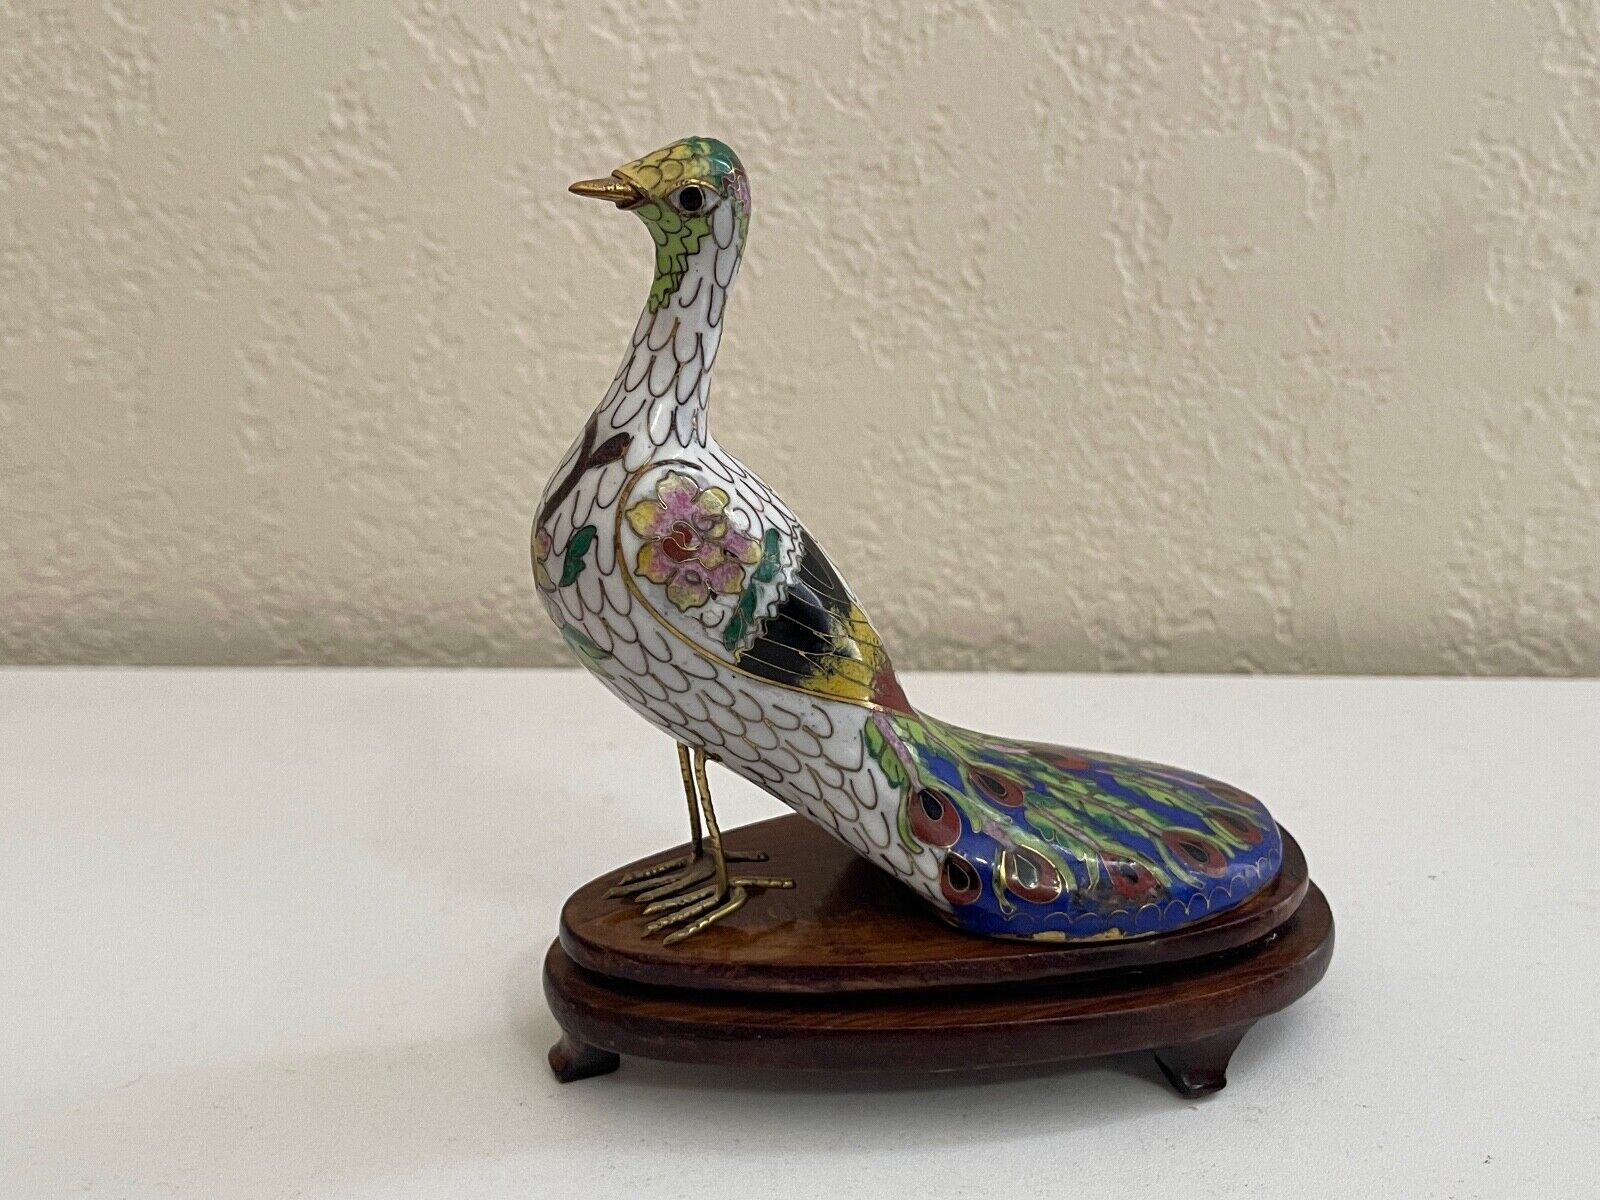 Vintage Chinese Cloisonne Peacock Bird Figurine on Wood Stand